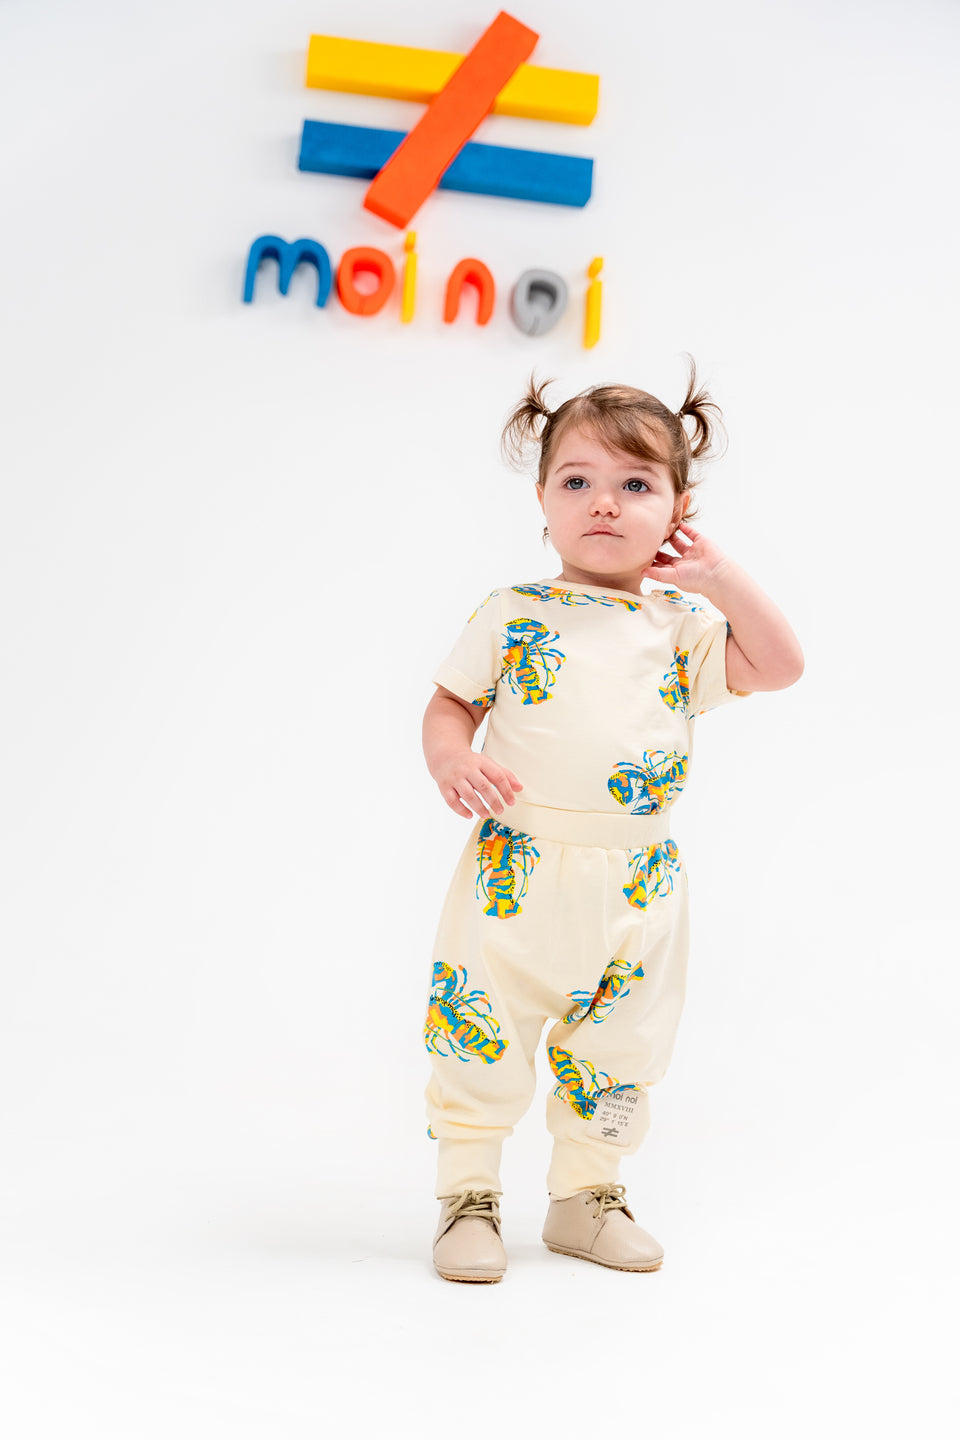 kids-atelier-moi-noi-gender-neutral-baby-girl-boy-yellow-sand-castle-graphic-babysuit-outfit-mn6018-yellow